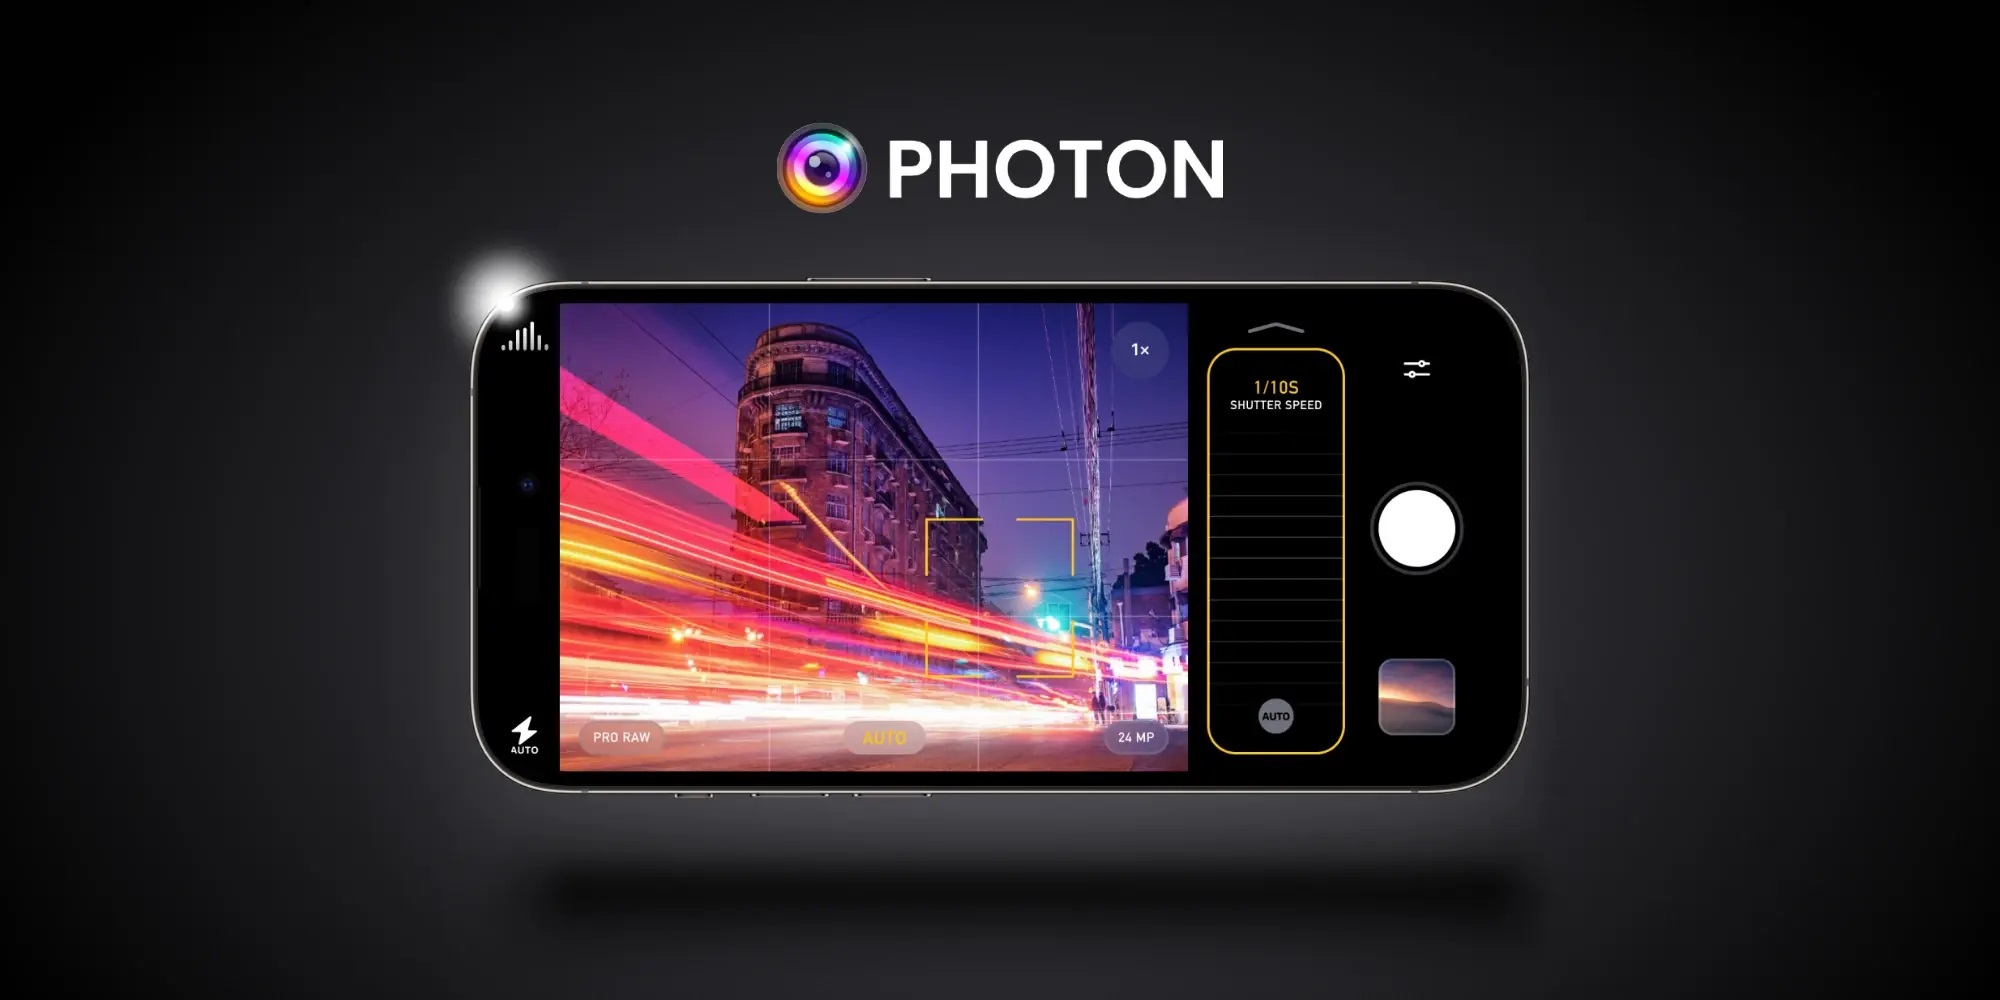 Photon’s New Feature Allows Pro Photographers To Shoot And Save To External Drive